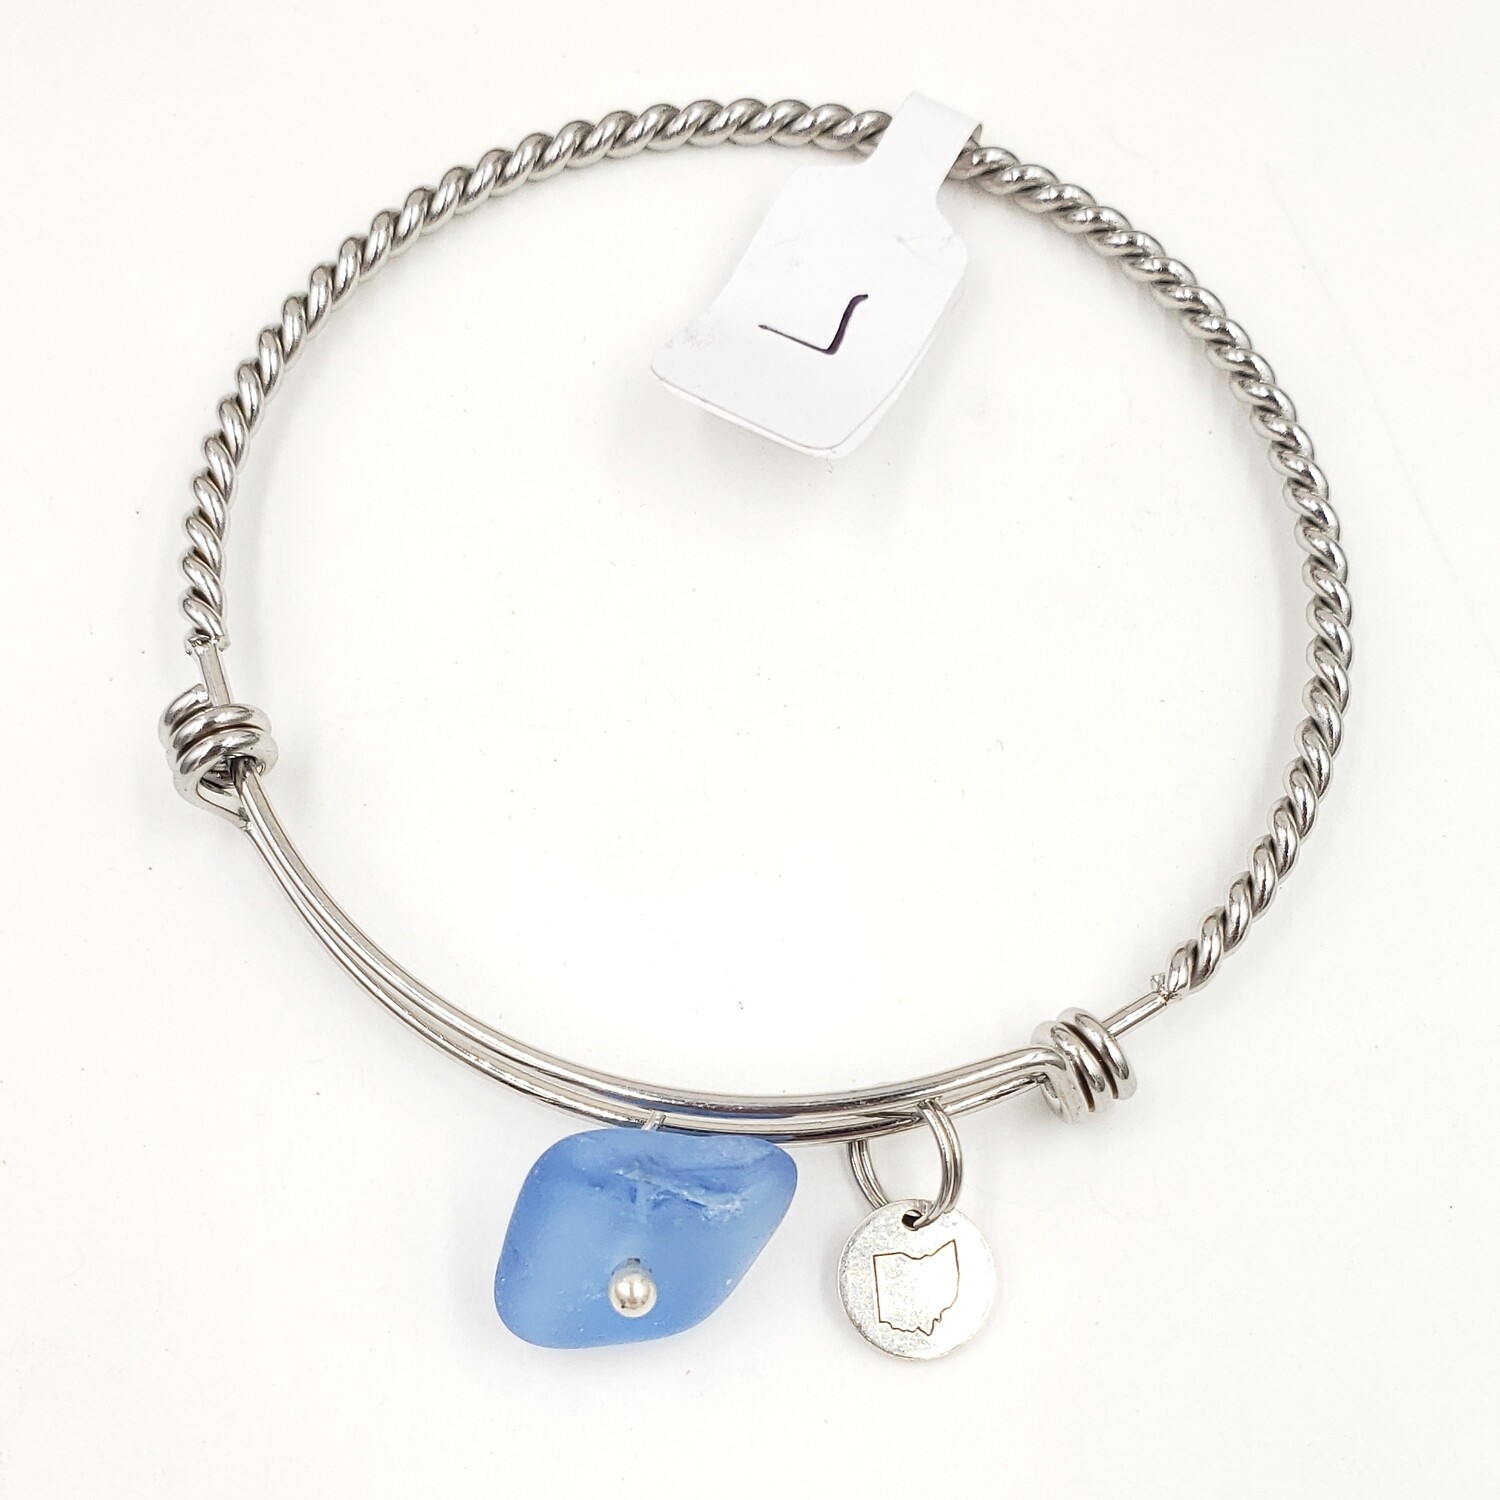 Bangle Bracelet with Stamped State of Ohio Charm and Cornflower Blue Lake Erie Beach Glass